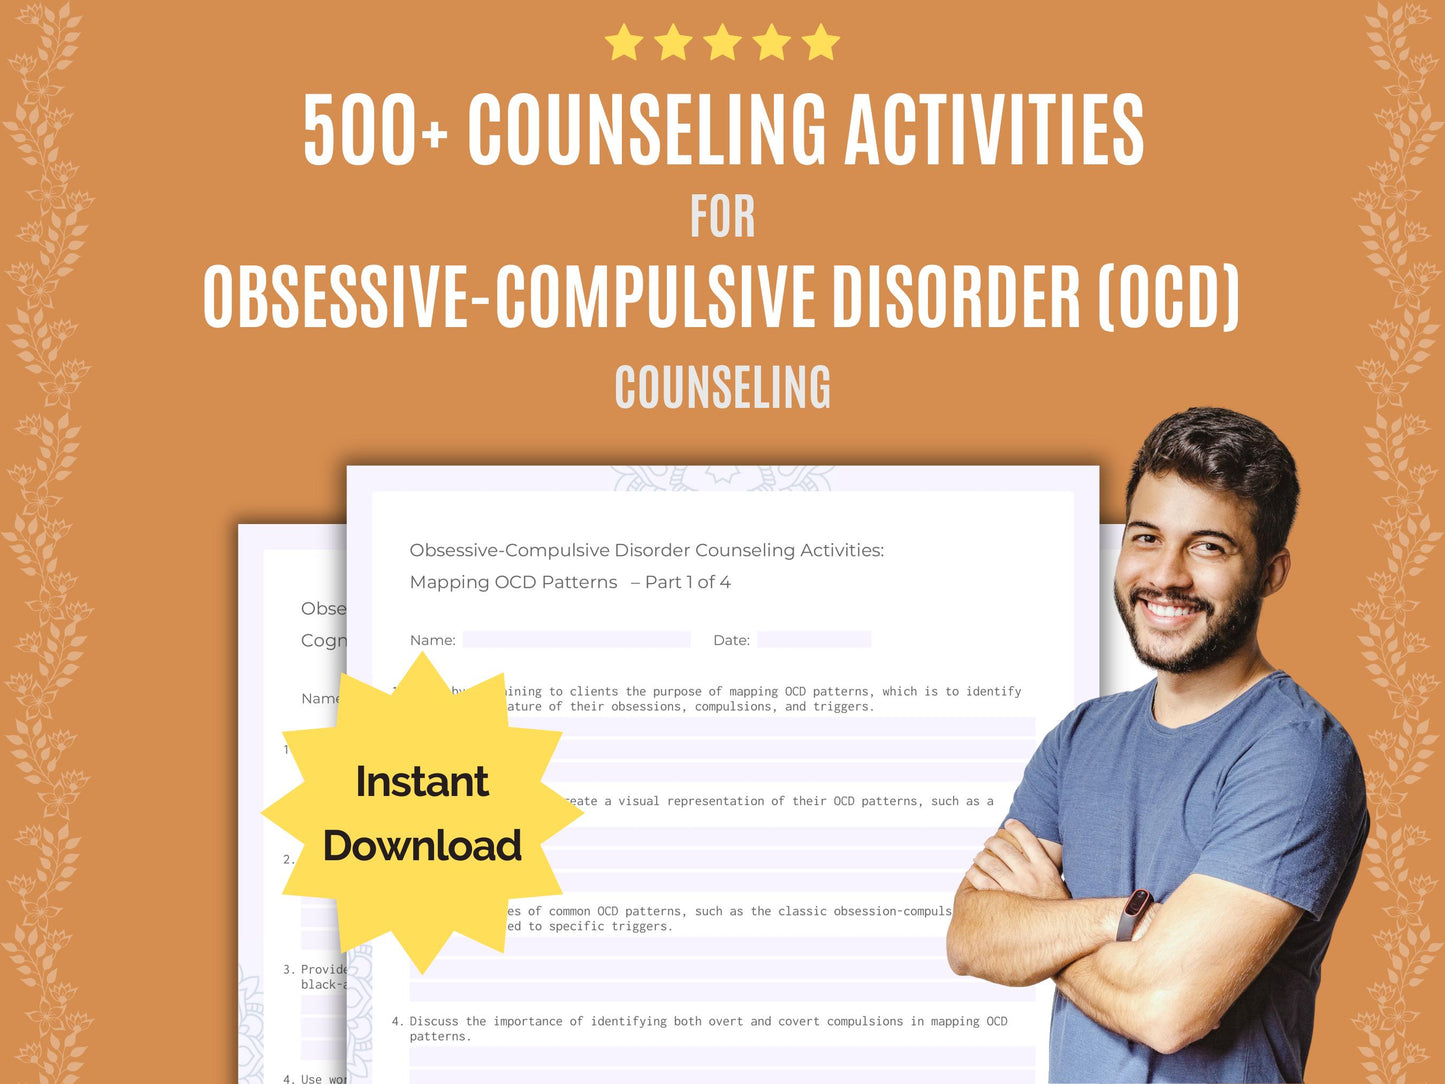 Obsessive-Compulsive Disorder (OCD) Counseling Activities